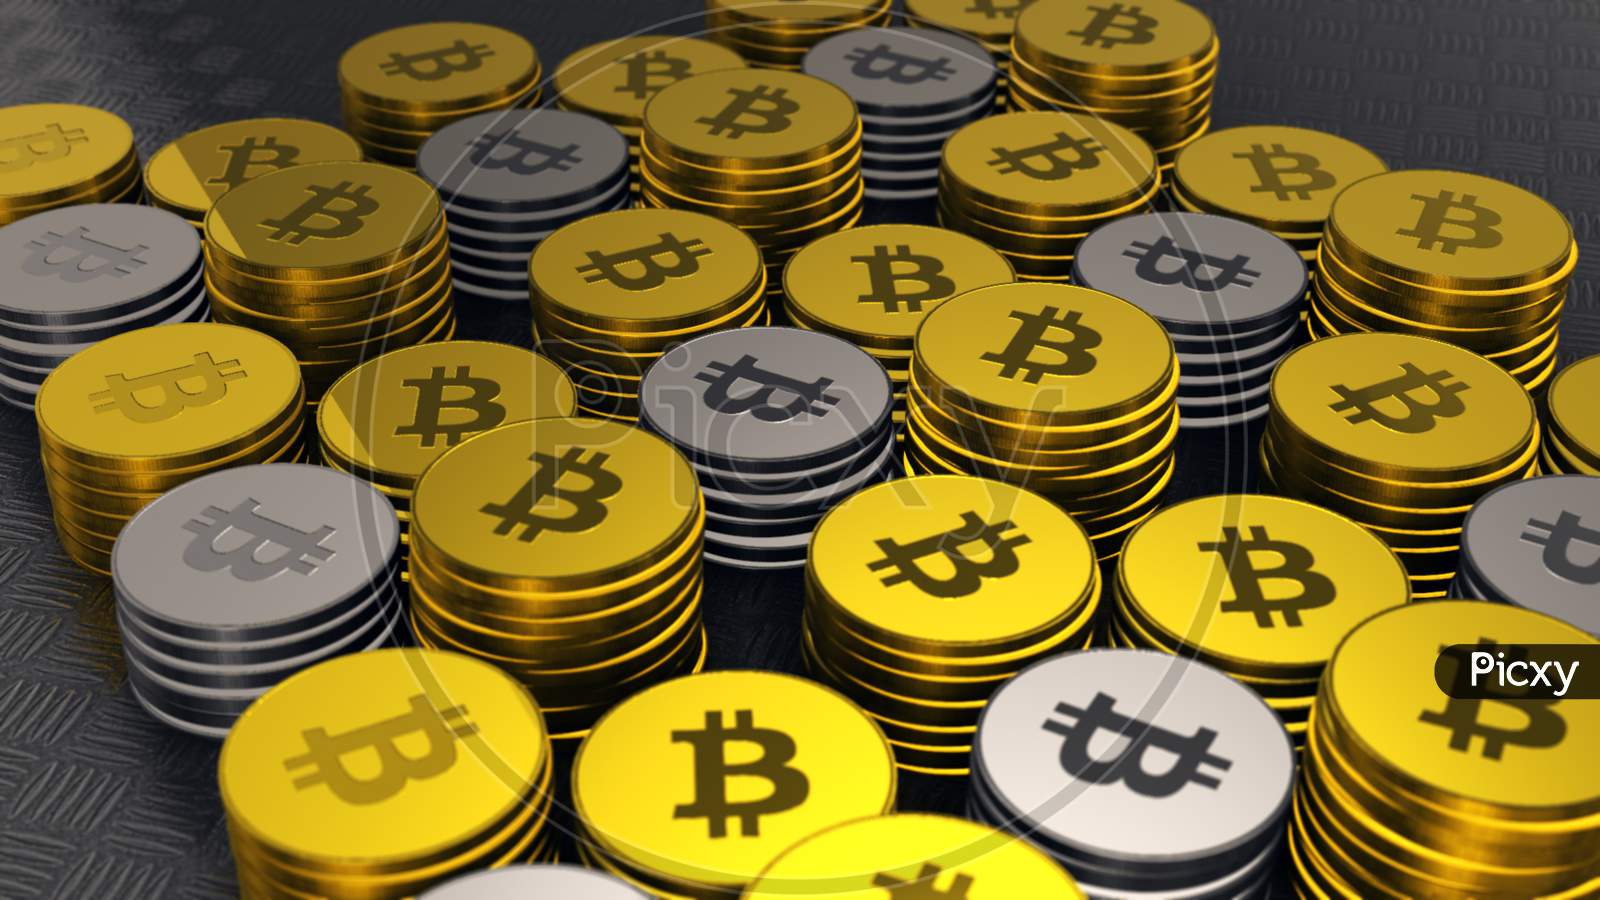 Gold And Silver Bitcoins, Crypto Currency, Closeup Shot Of Bitcoins With Nice Environmental Light Effects,Btc Currency, Business And Technology Concept, 4K High Quality .